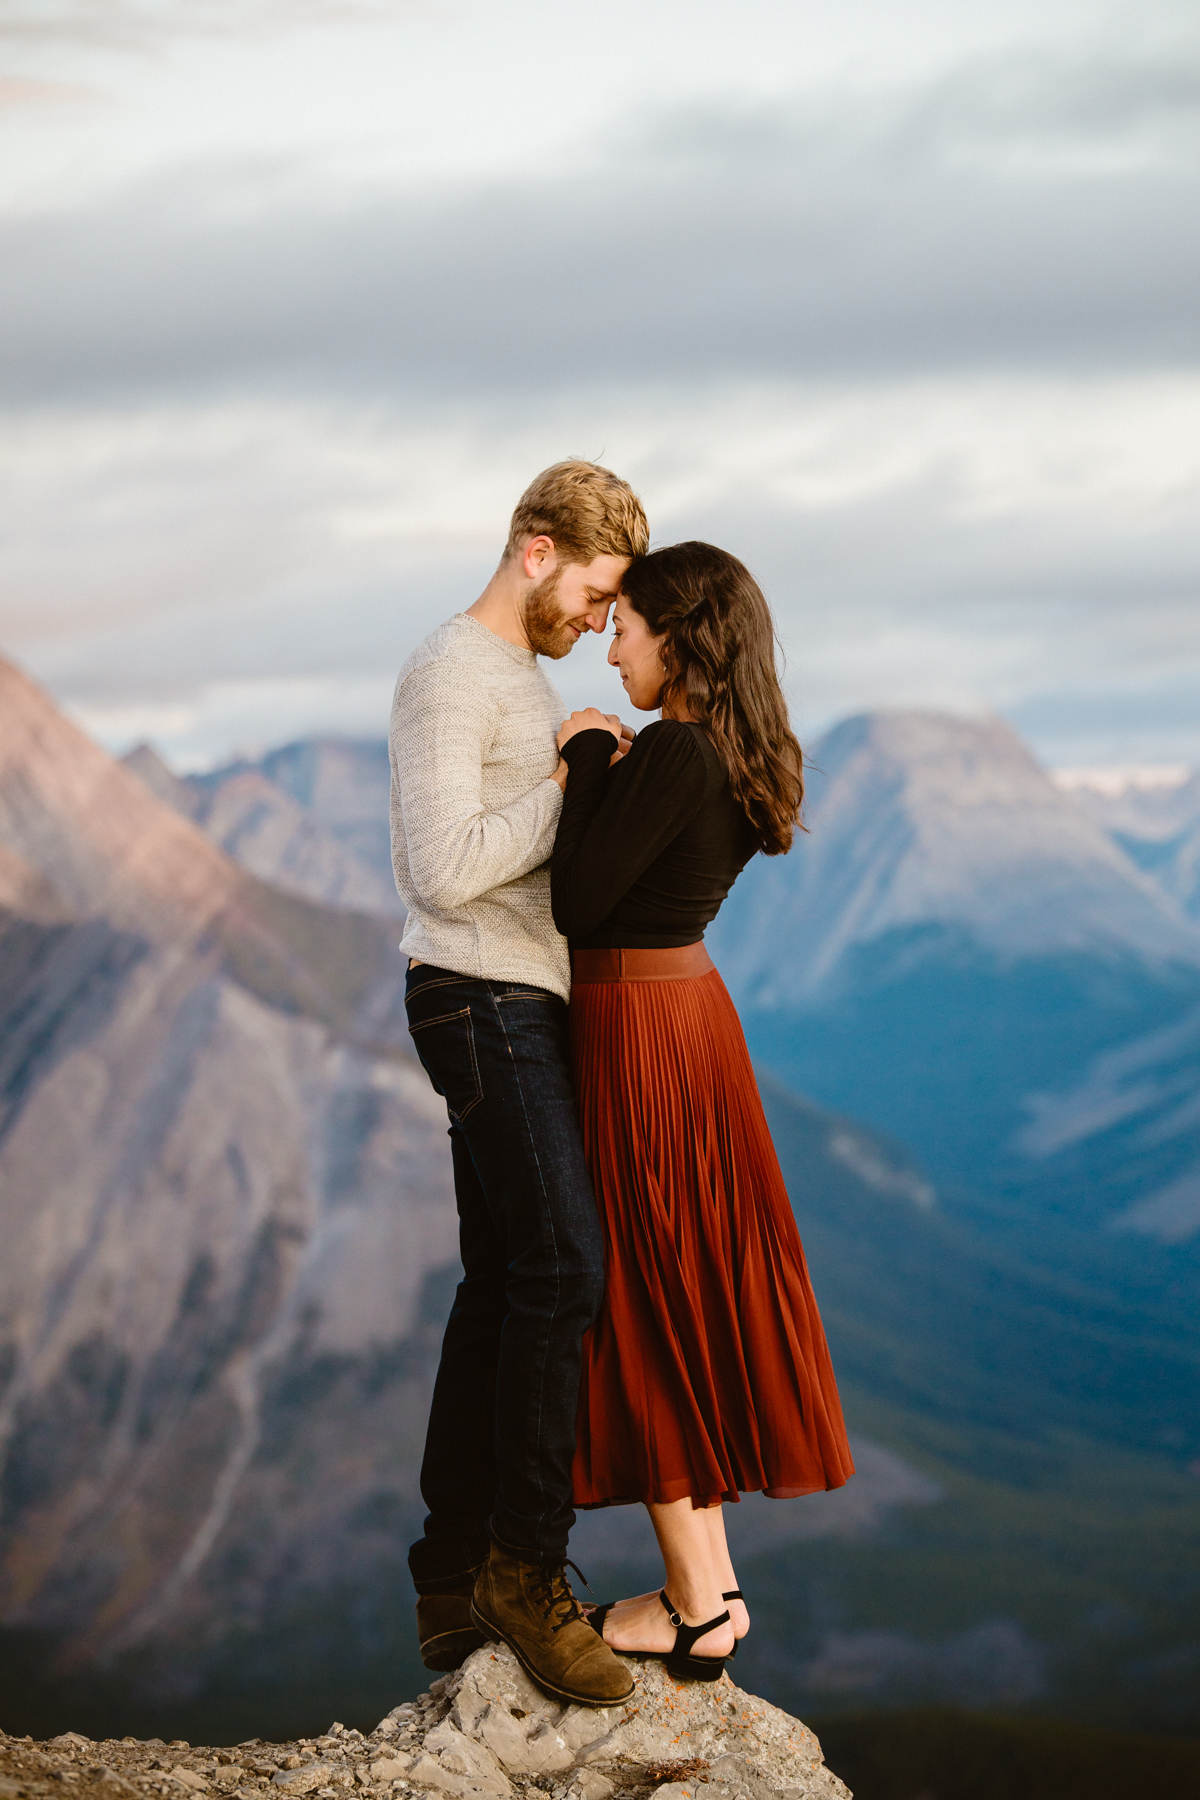 Canmore hiking engagement photos in Kananaskis Country - Image 12